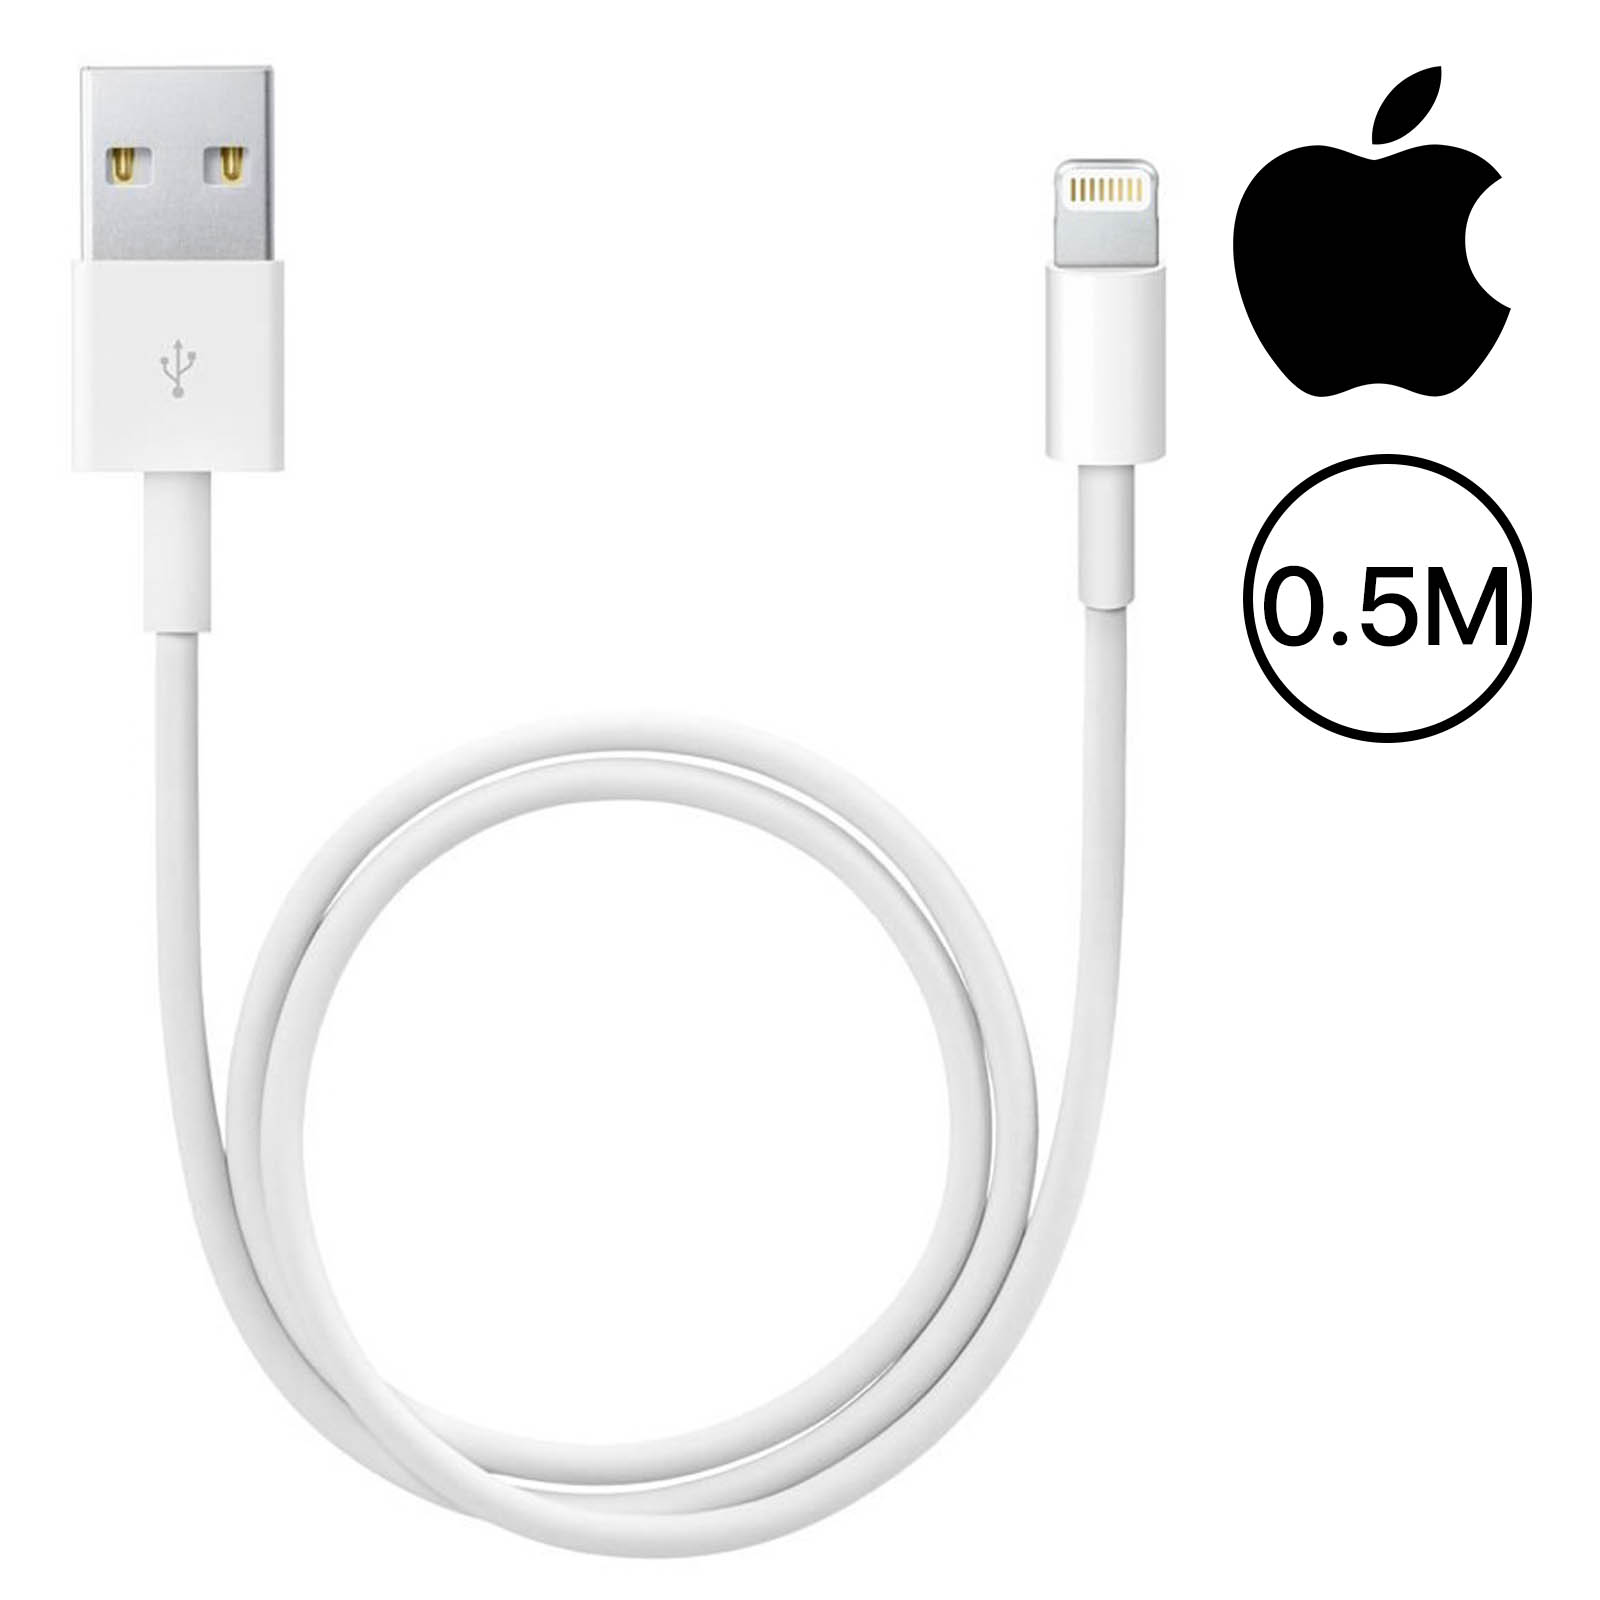 Cable iPhone - iPad Original Apple long. 0,5m connect. Lightning